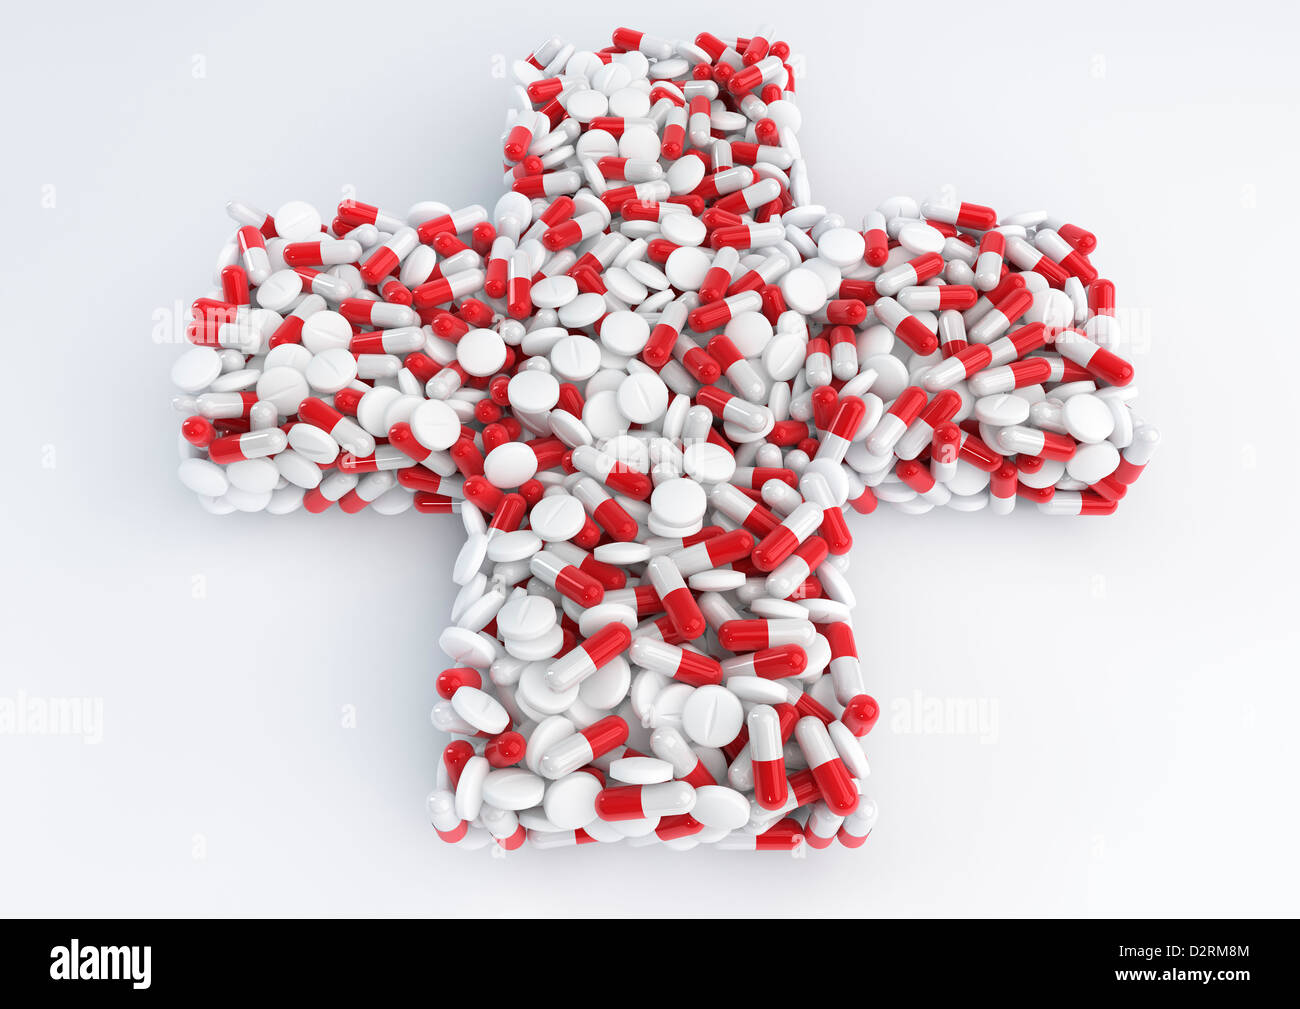 PILLS / DRUGS forming a medical cross symbol - CONCEPT image Stock Photo